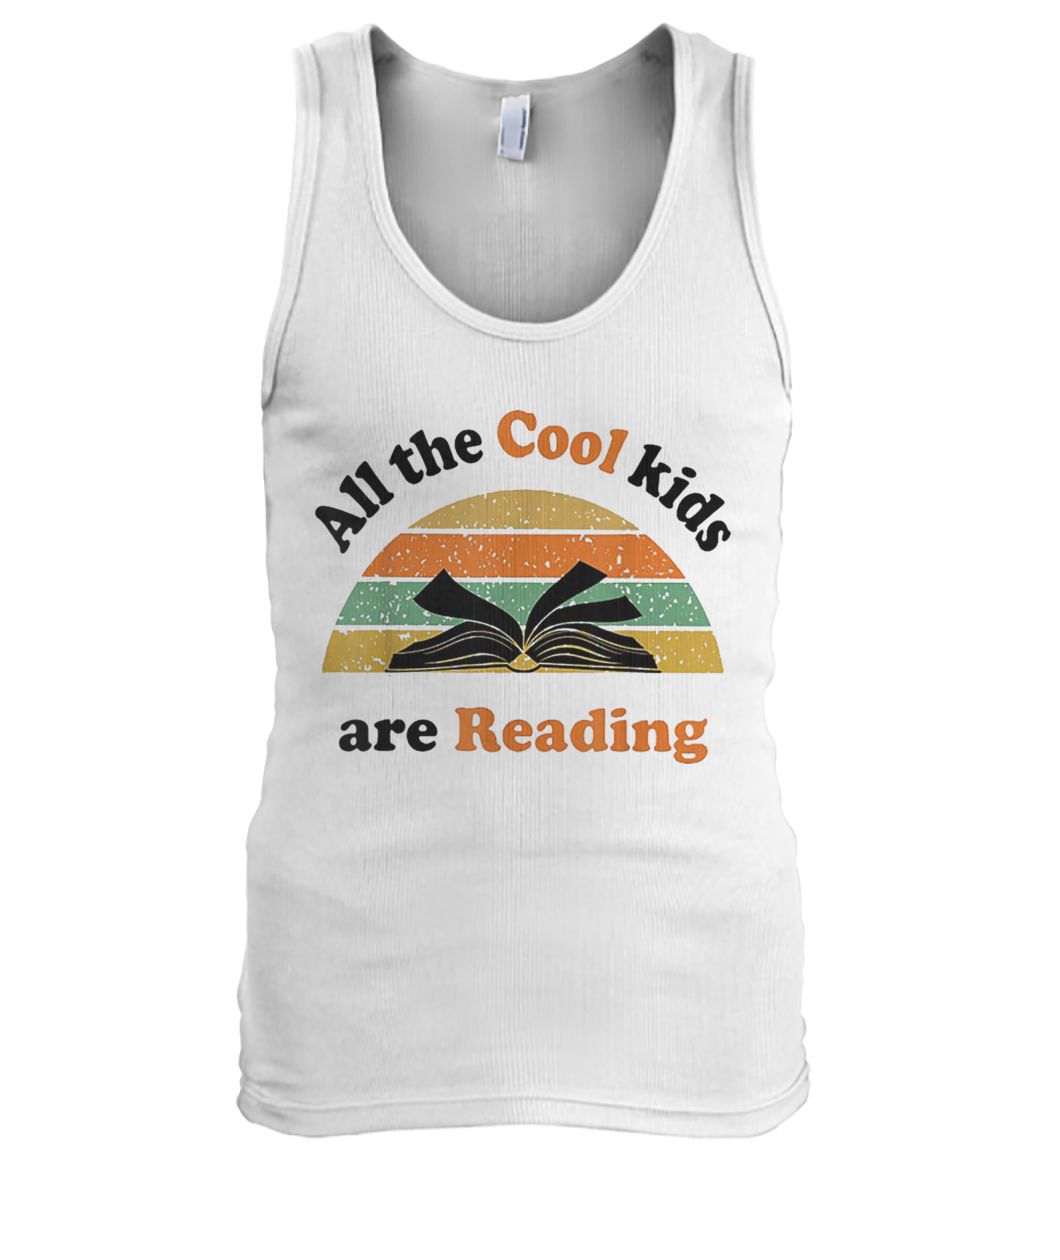 All the cool kids are reading vintage men's tank top